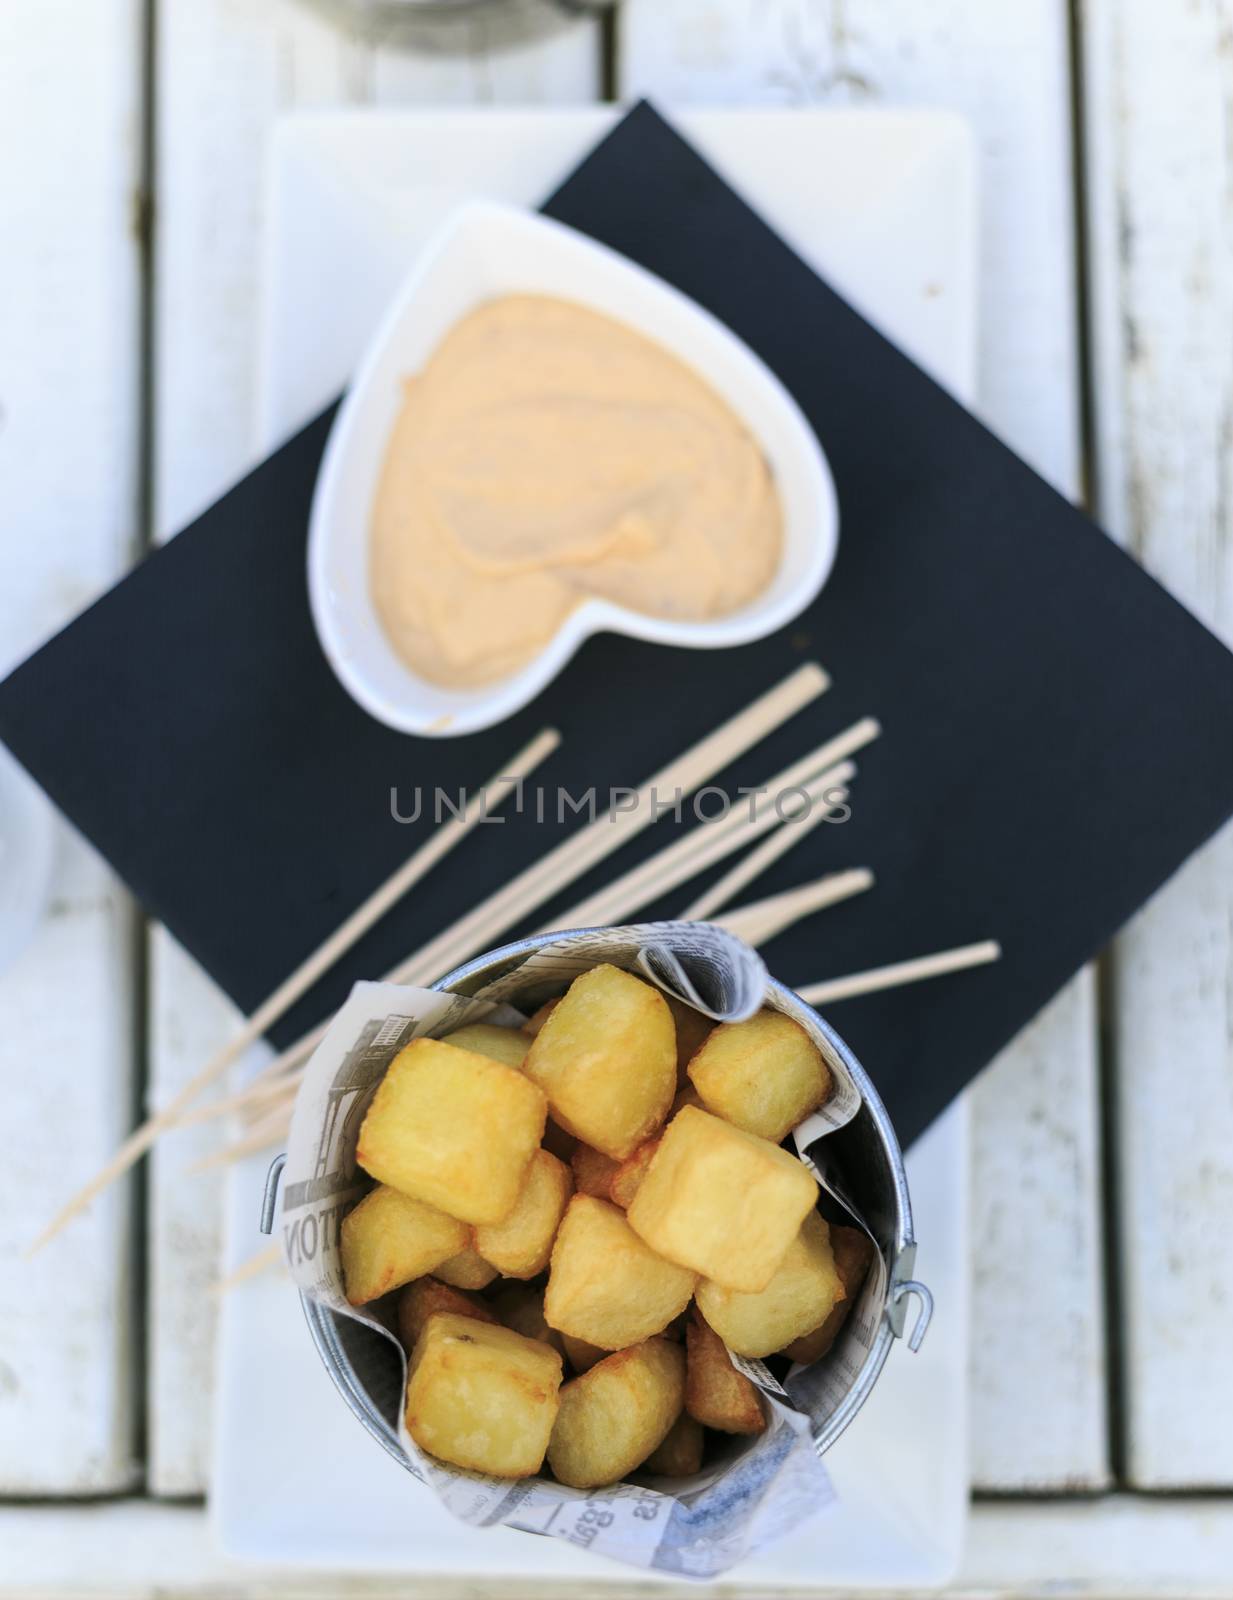 Traditional tapa from Spain. Cube bravas potatoes by nachrc2001